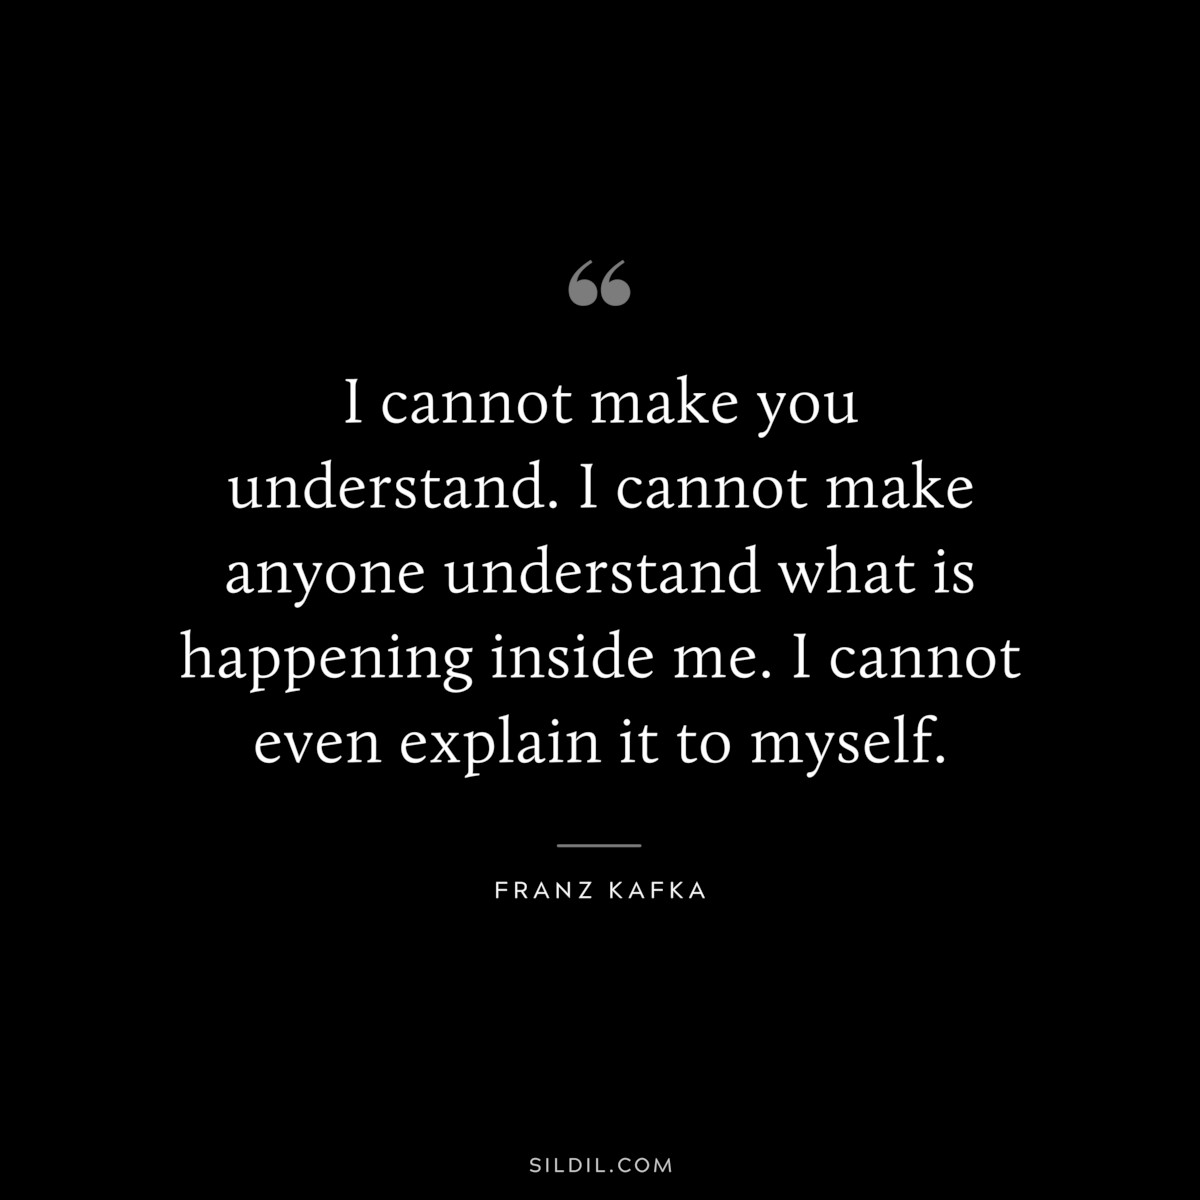 I cannot make you understand. I cannot make anyone understand what is happening inside me. I cannot even explain it to myself. ― Franz Kafka